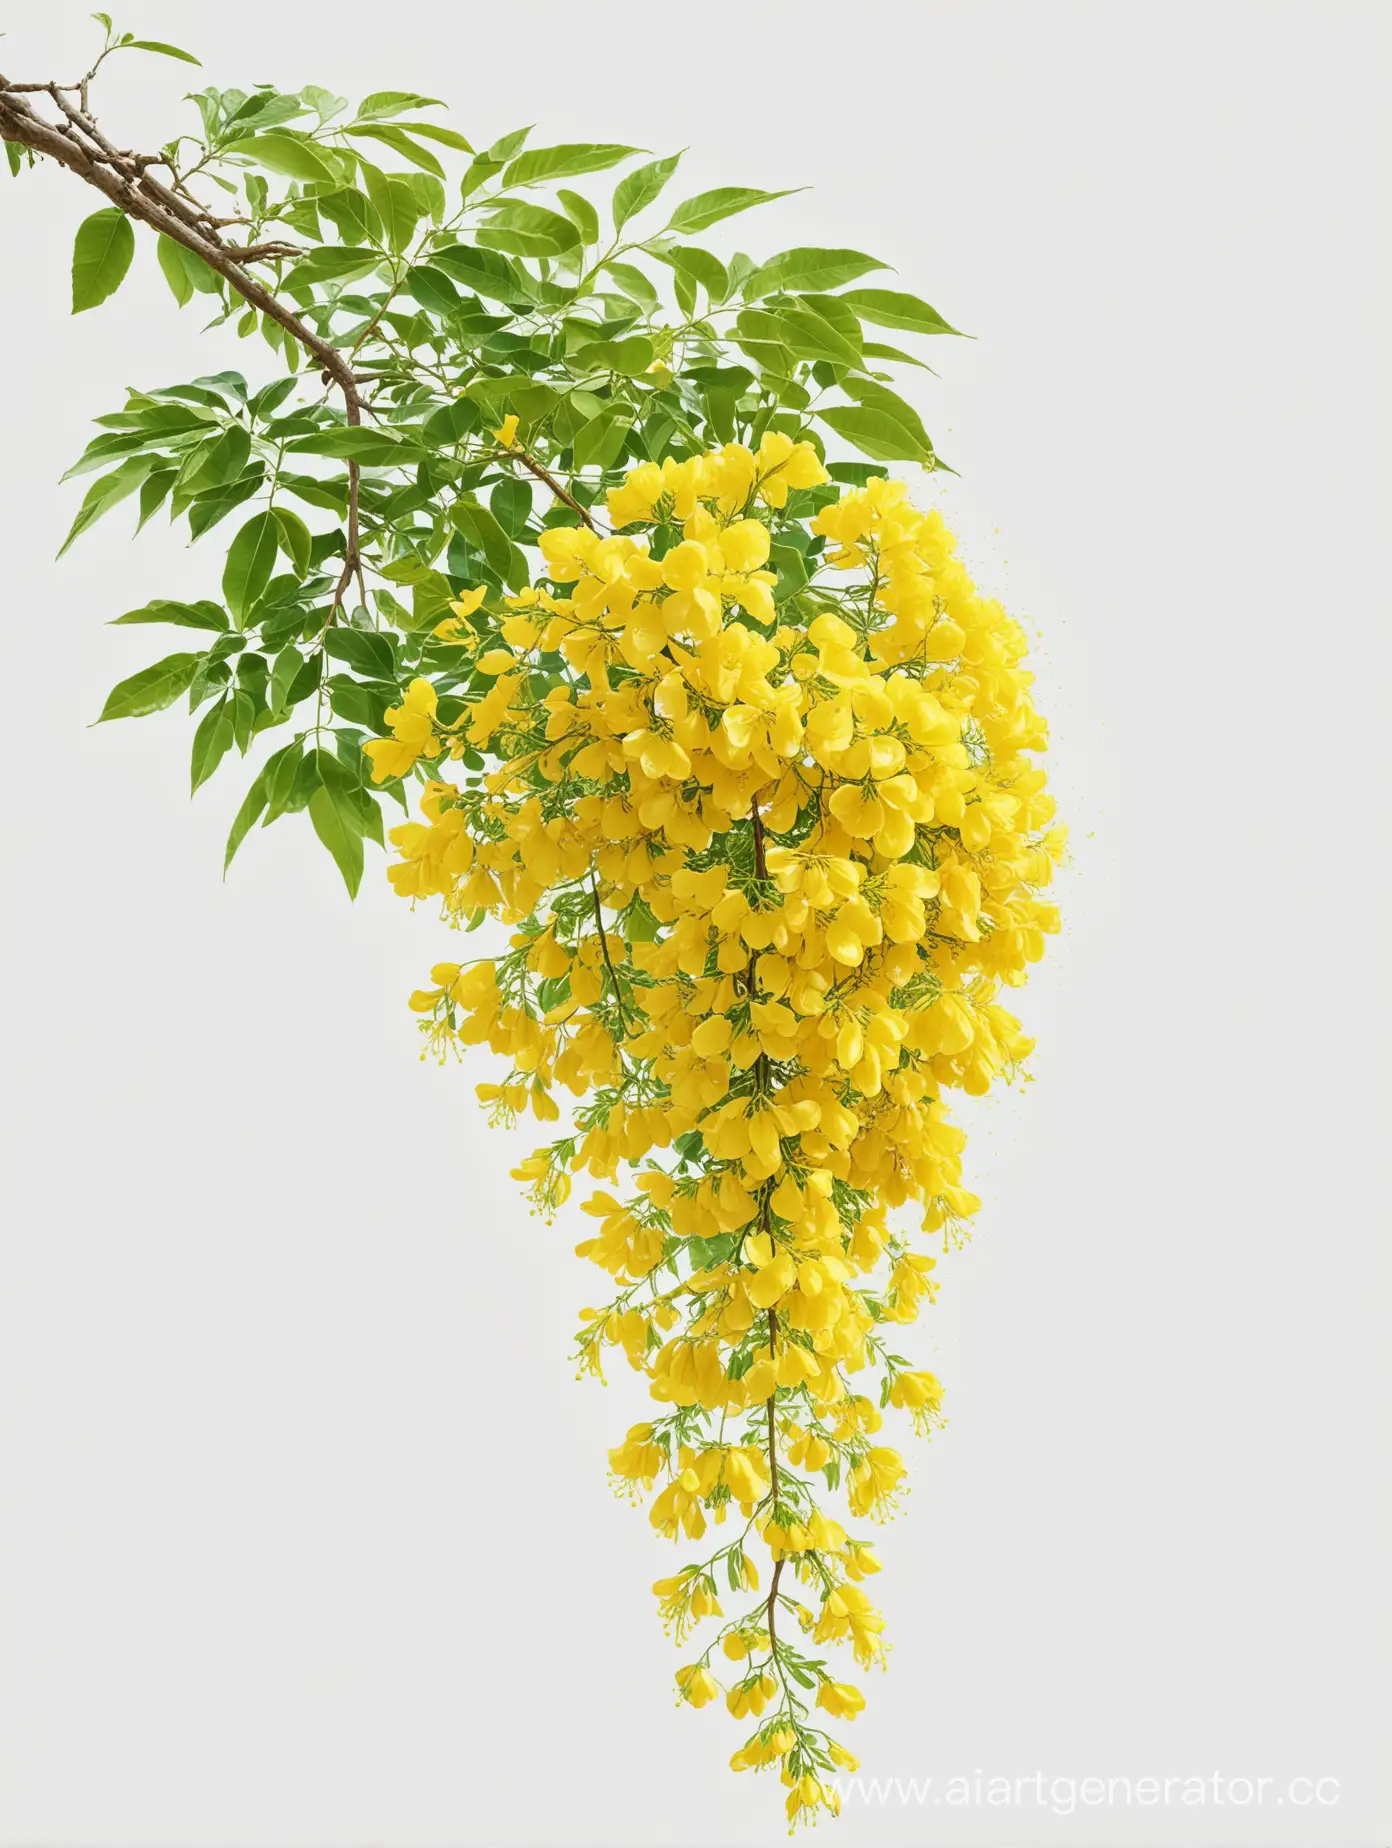 a yellow golden shower tree flower with green leaves on a white background stock, with yellow flowers around it, hd illustration, yellow flowers, 1024x1024, sweet acacia trees, flower, the yellow creeper, tropical flower plants, yellow colours, drawn image, yellow and green, intermediate art, yelow, f 2 0, large exotic flowers